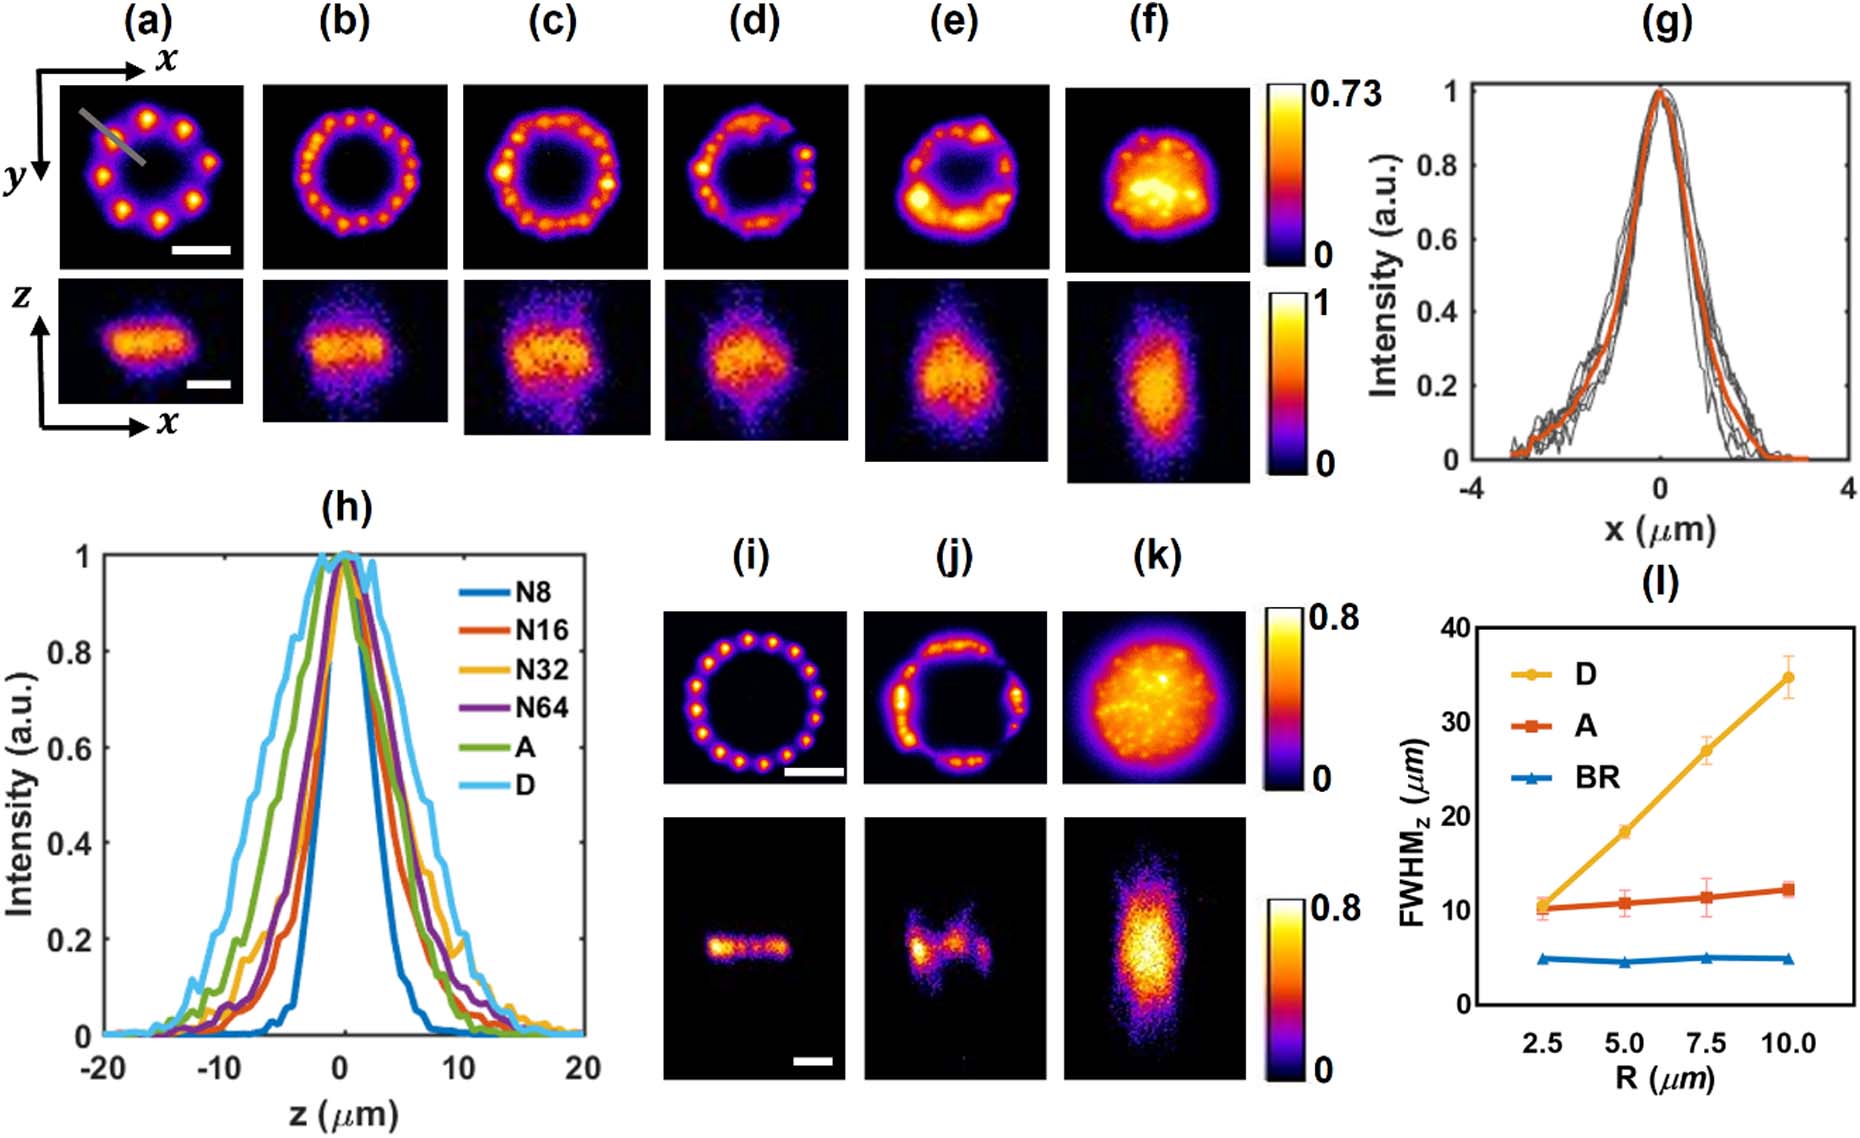 Characterization of generated holographic patterns for a single target stimulation. (a)–(f) Two-photon intensity distributions in xy (upper) and xz (lower) section of beaded ring of 8, 16, 32, and 64 foci, annular, and disk patterns with 5 μm radius, respectively. Scale bar: 5 μm. (g) Lateral intensity distribution of each focus in (a) and the average lateral intensity of all eight foci, labeled with gray and red lines, respectively. (h) Axial intensity distribution of different patterns shown in (a)–(f). N8, beaded-ring pattern of eight foci (N16, N32, and N64 have similar definitions); A, annular pattern; D, disk pattern. (i)–(k) Two-photon intensity distributions in xy (upper) and xz (lower) section of beaded-ring of 16 foci, annular, and disk patterns with 10 μm radius, respectively. Scale bar: 10 μm. (l) Axial resolution of the beaded-ring, annular, and disk patterns with different radii. D, disk pattern; A, annular pattern, BR, beaded-ring pattern. Five patterns of different radii for each type are generated, and the center of each pattern is 20 μm away from the origin. The data shown in (l) are the mean and standard deviation of axial resolutions of five patterns.